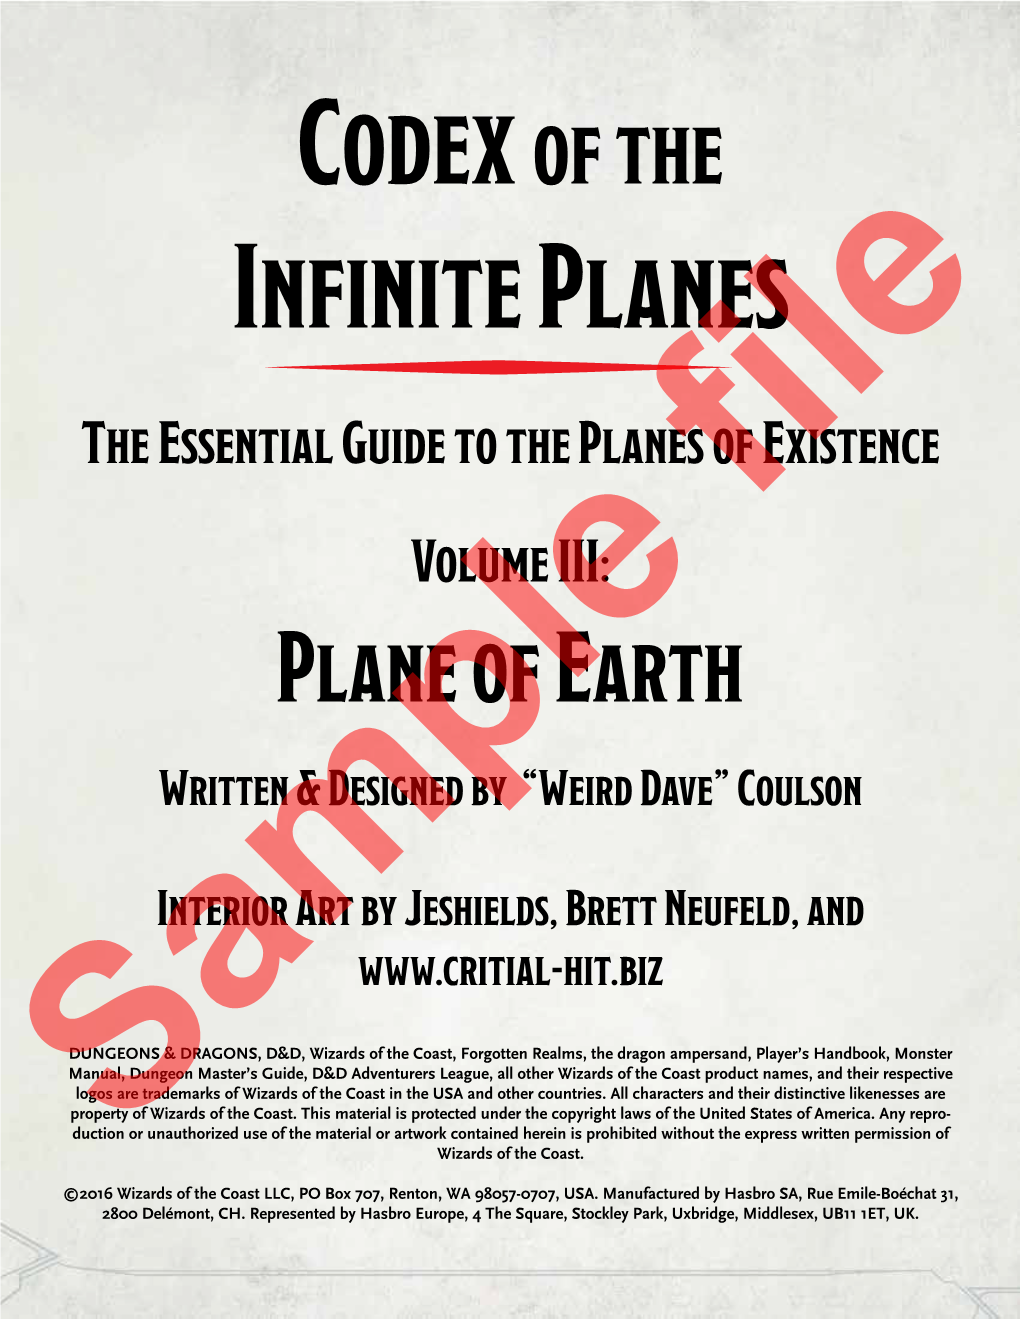 Plane of Earth Written & Designed by “Weird Dave” Coulson